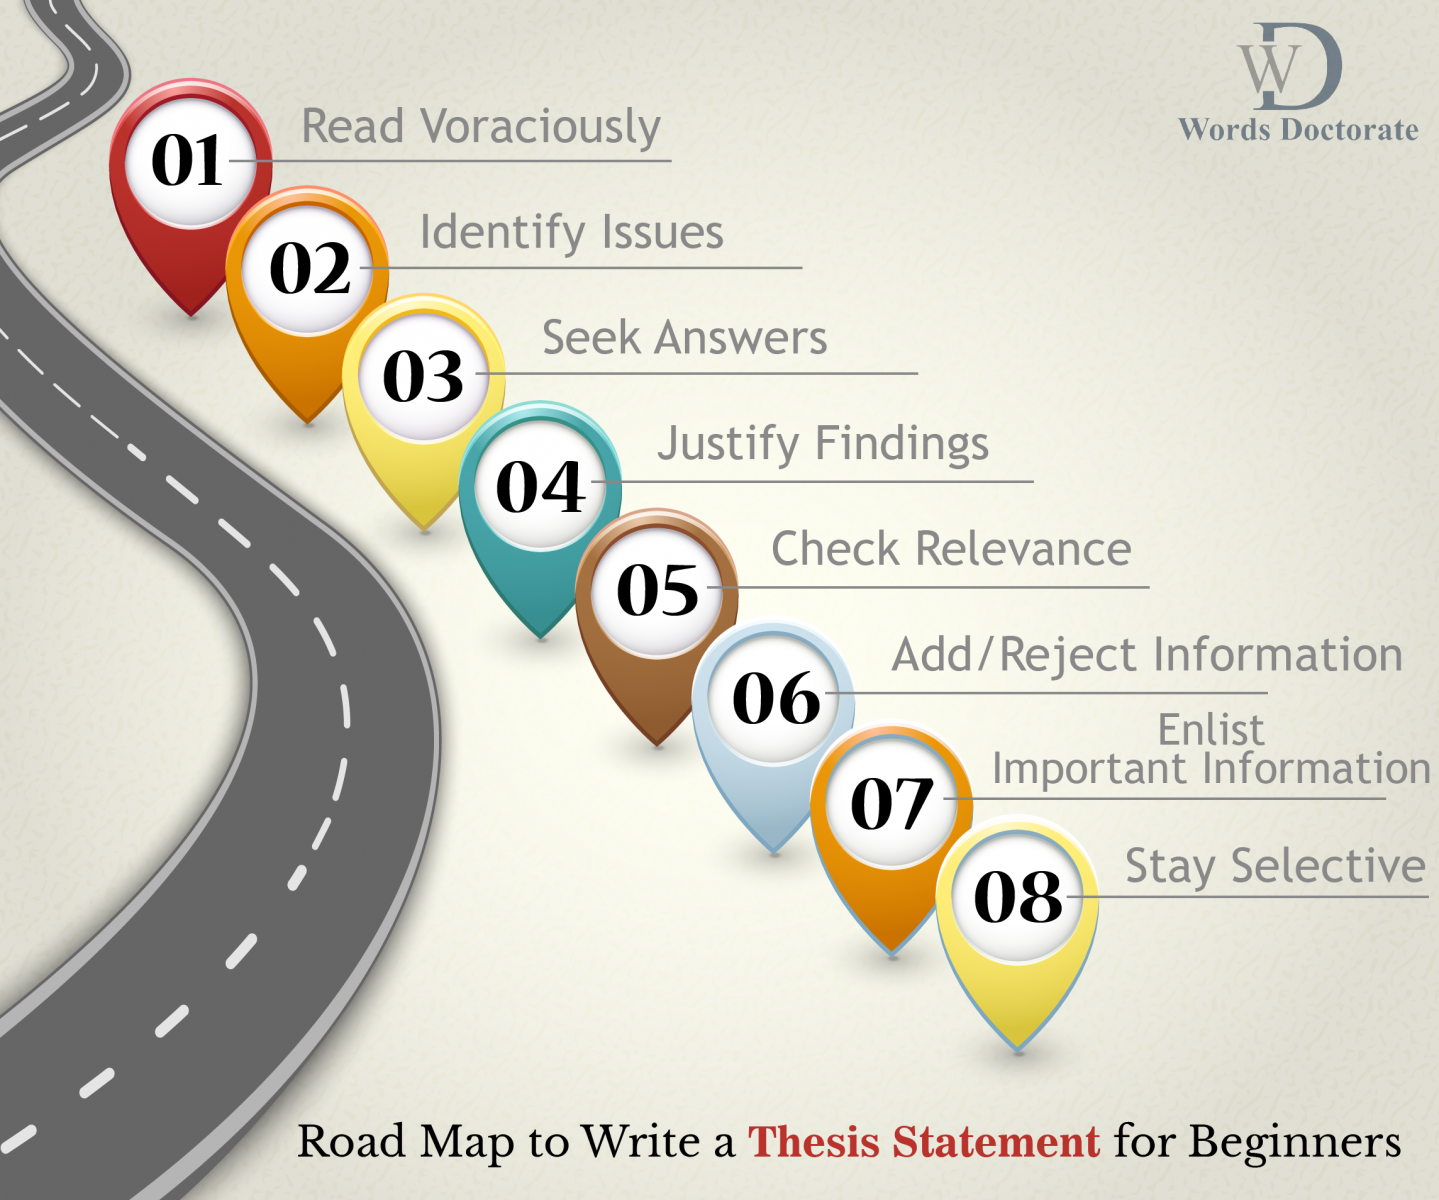 Road Map to Write a Thesis Statement for Beginners